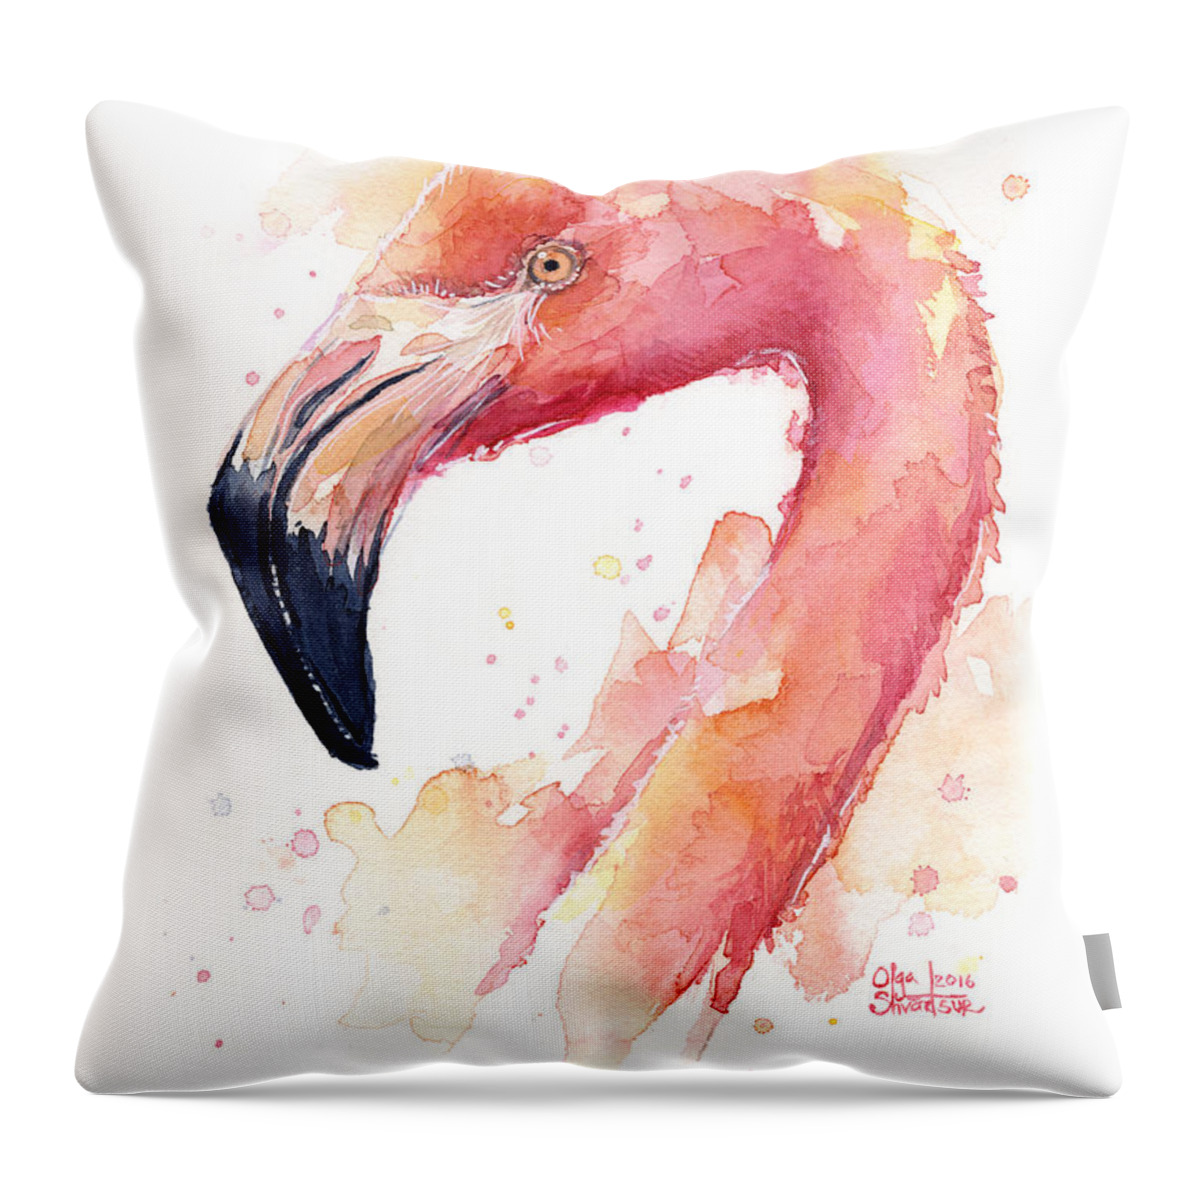 Flamingo Throw Pillow featuring the painting Flamingo Watercolor by Olga Shvartsur